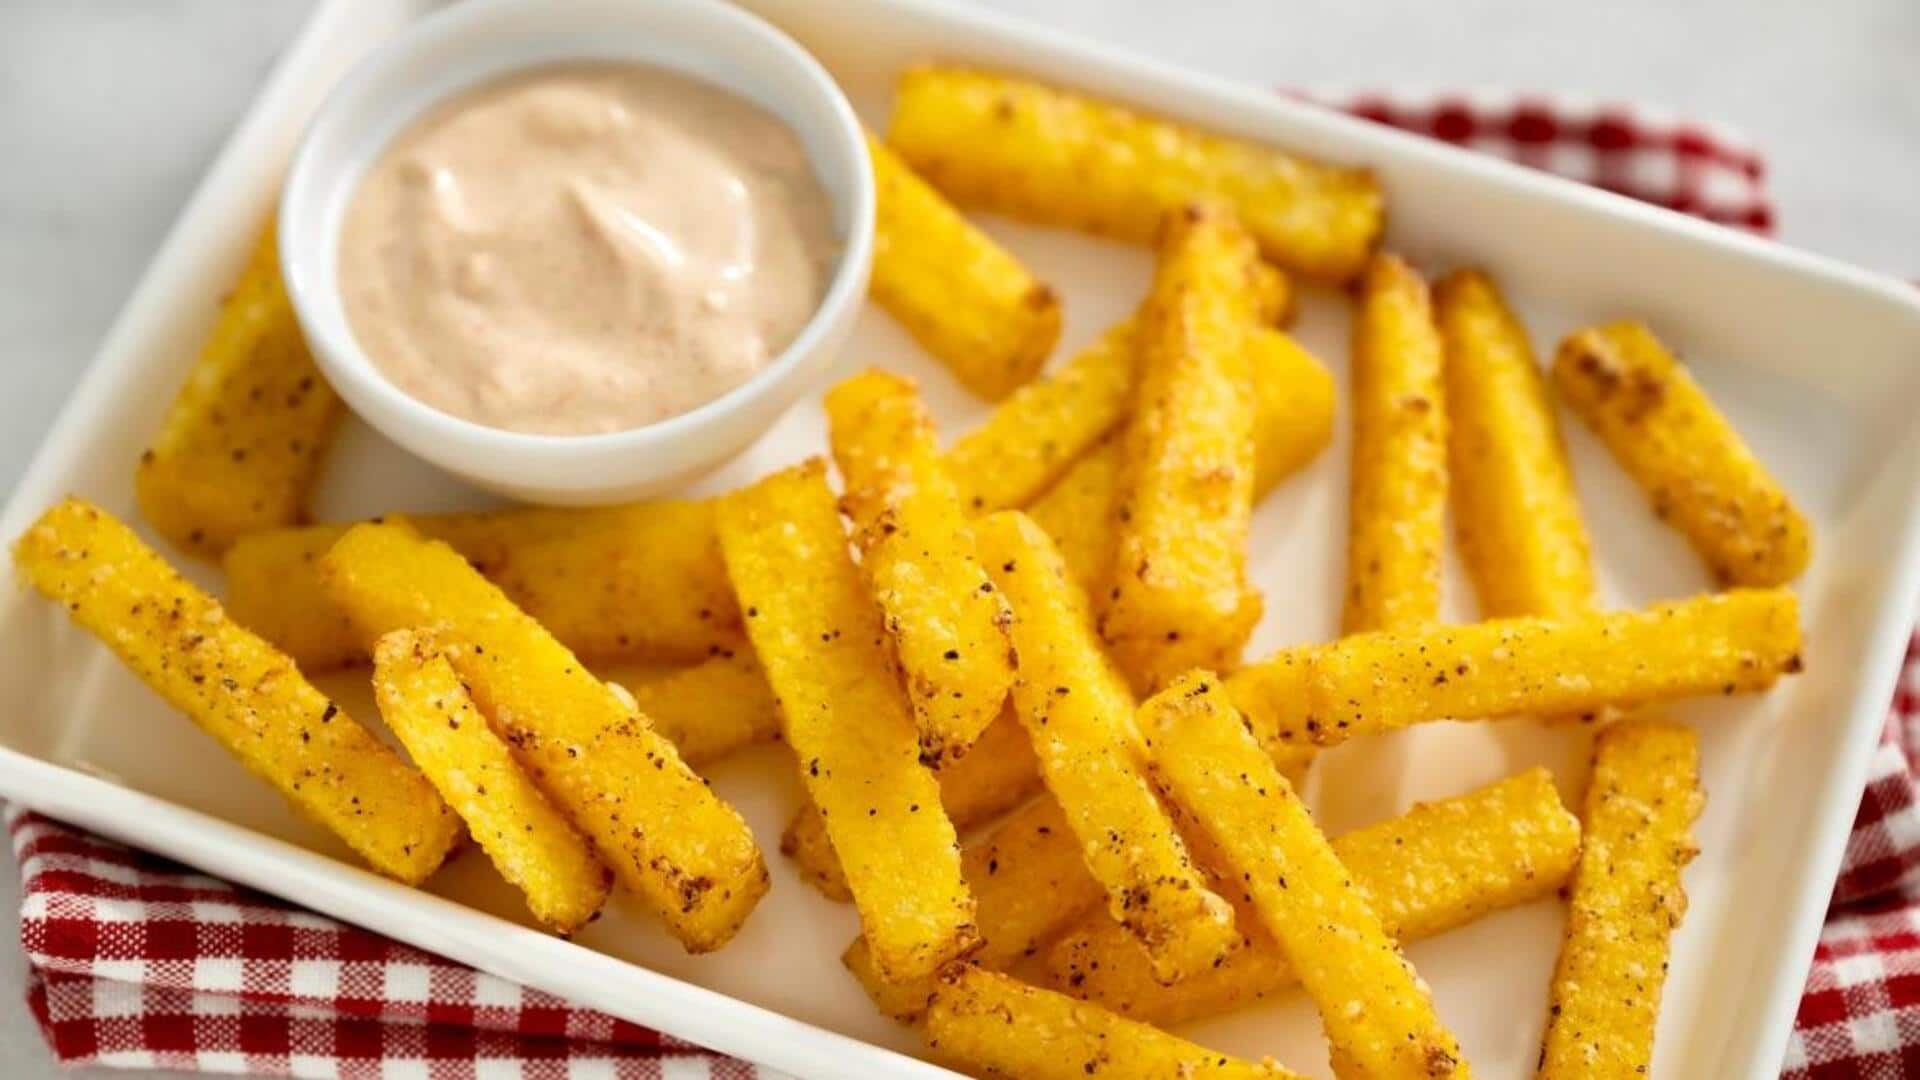 Crispy baked polenta fries: A recipe for the perfect snack